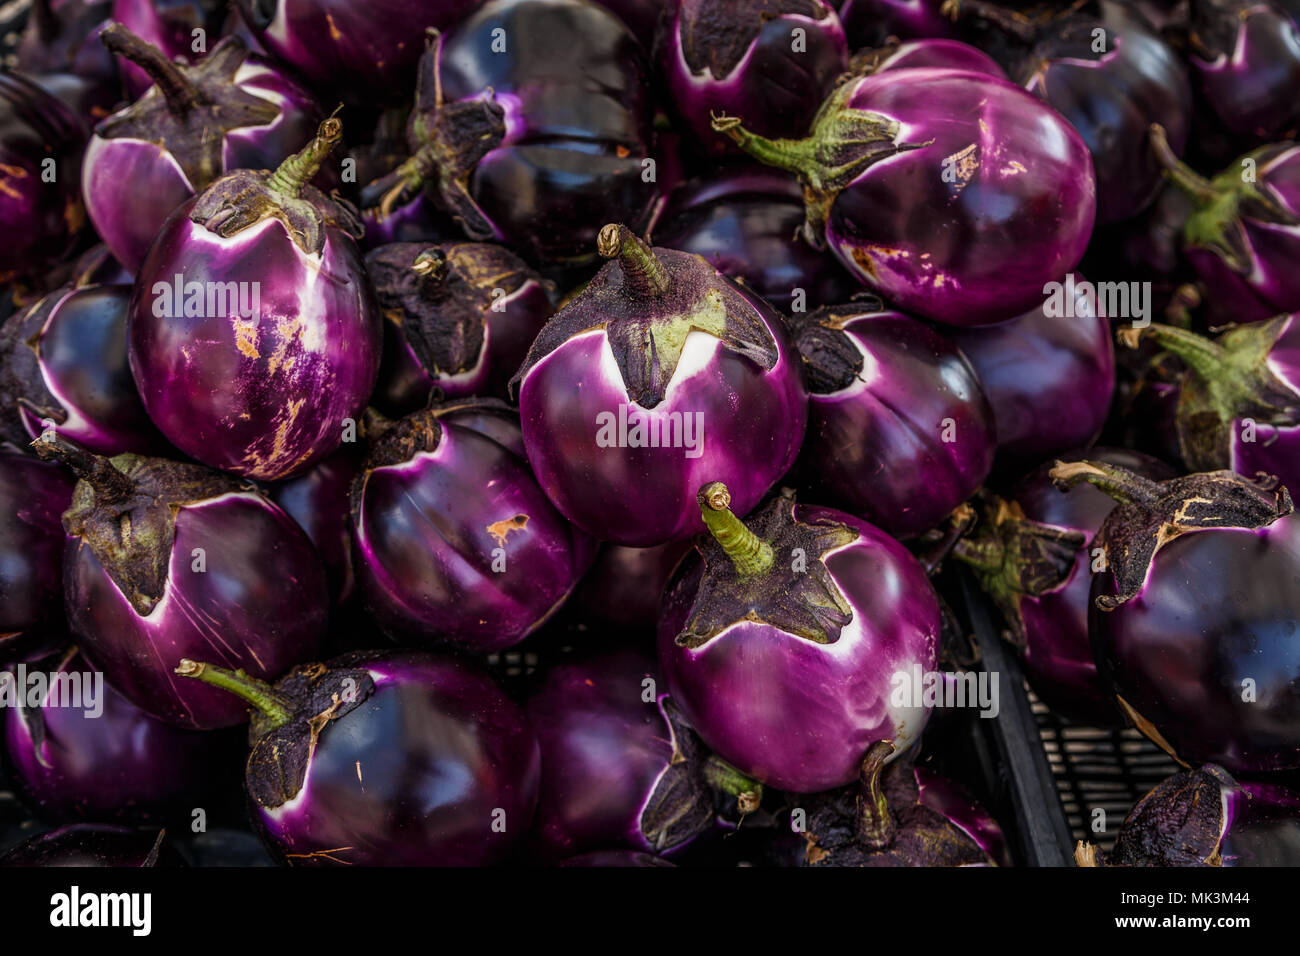 Eggplants in the streets of famous Ballarò market in Palermo, Sicily Stock Photo